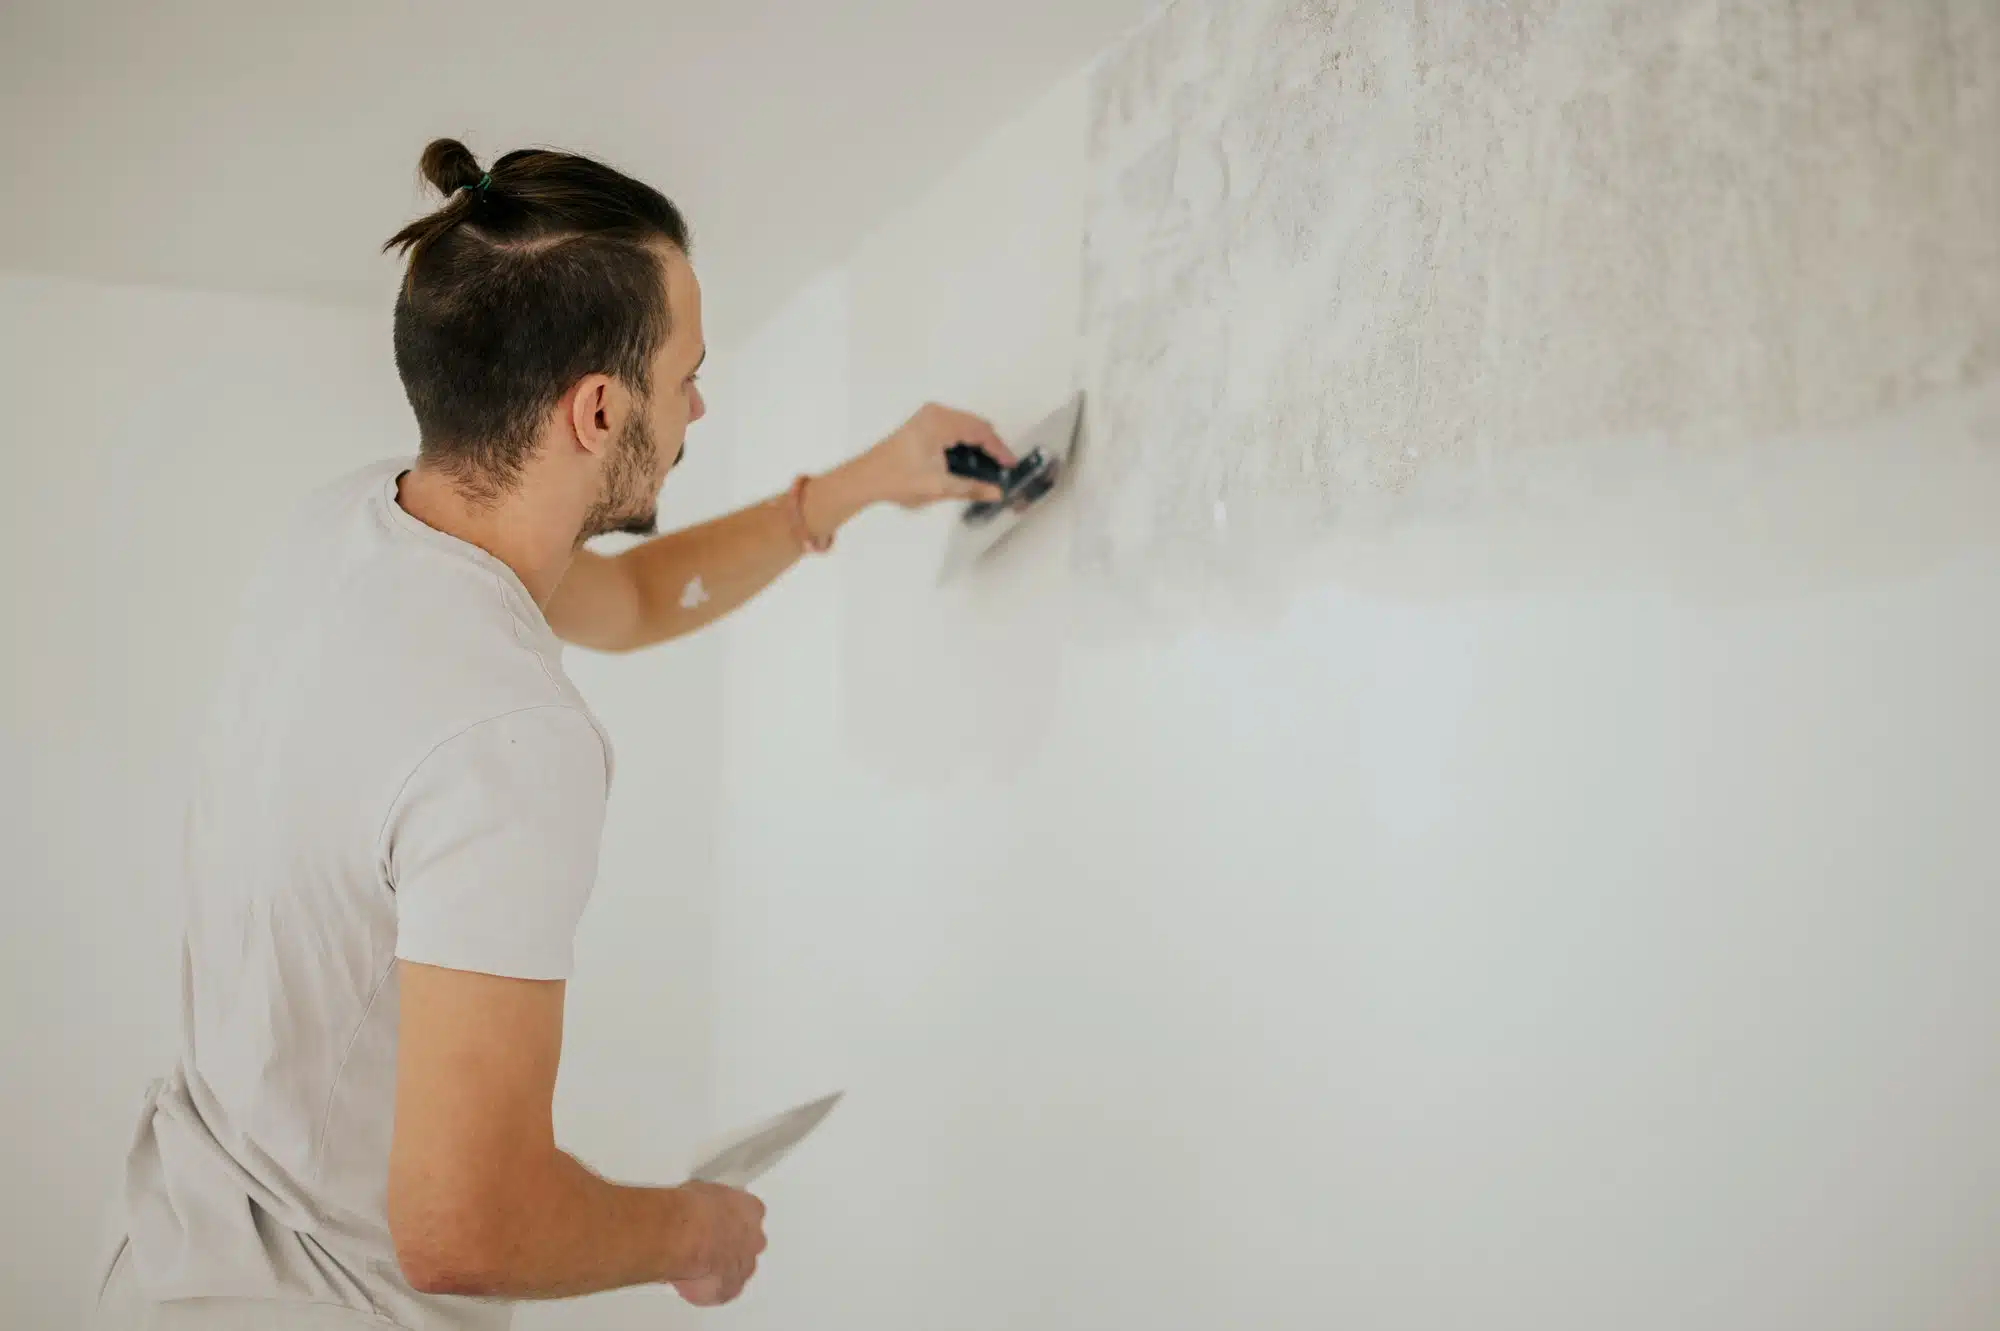 A plasterer is using tools for skim coating walls.